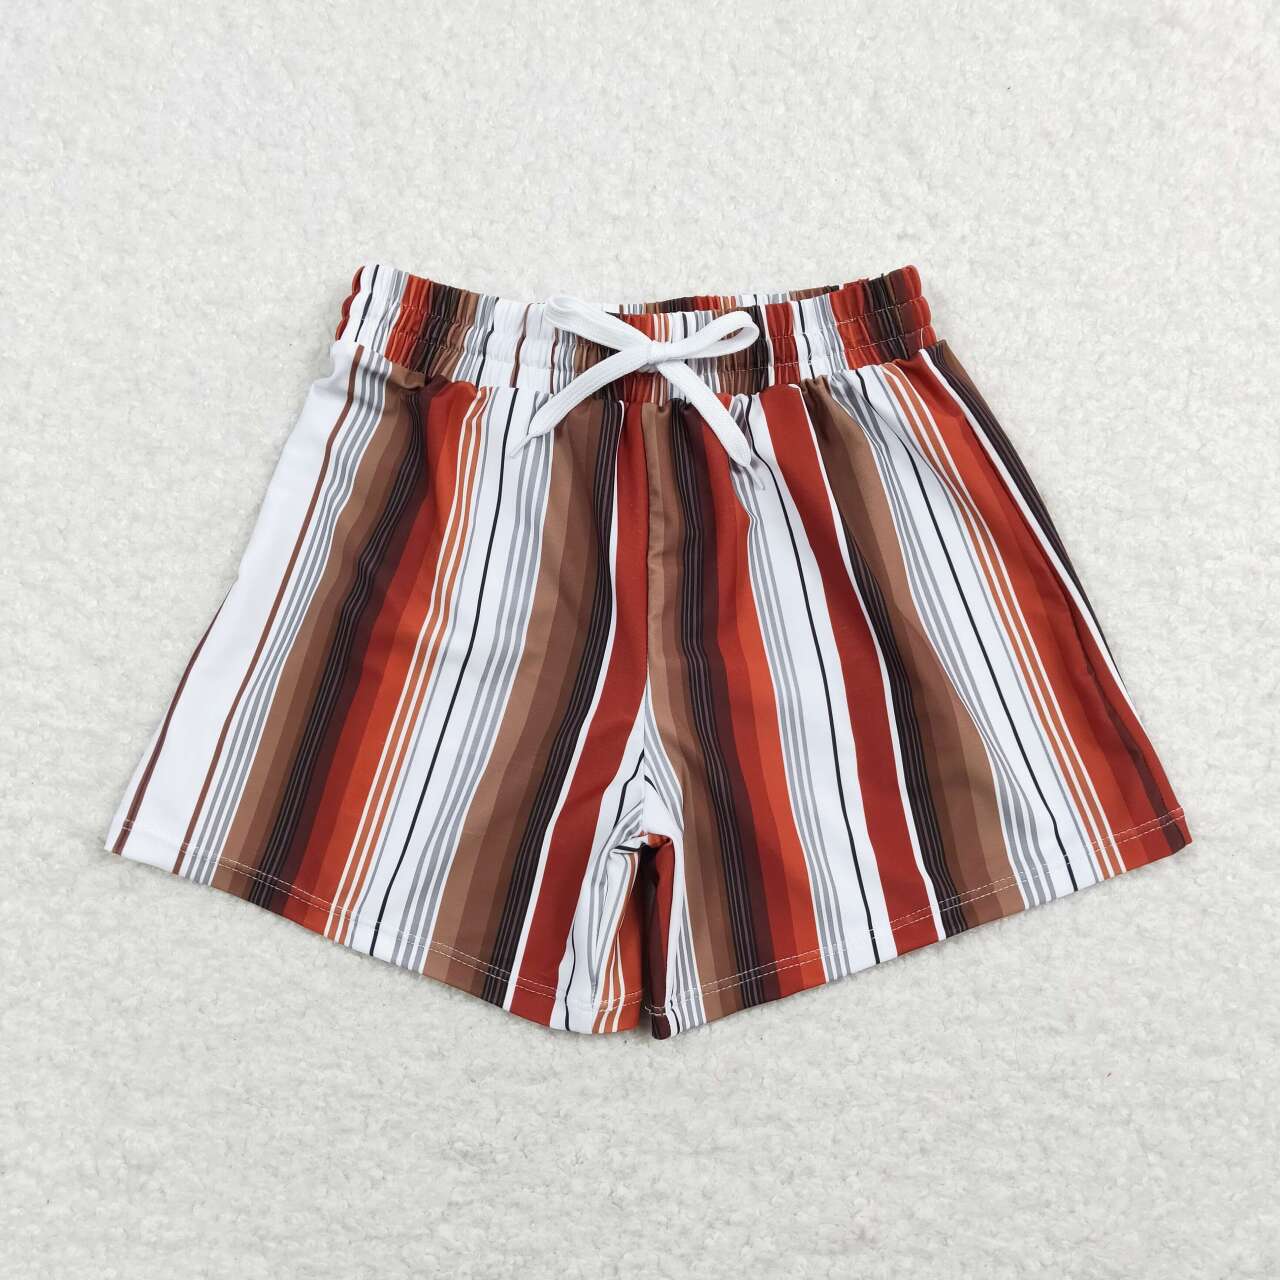 colored lined baby boy swimsuit trunk